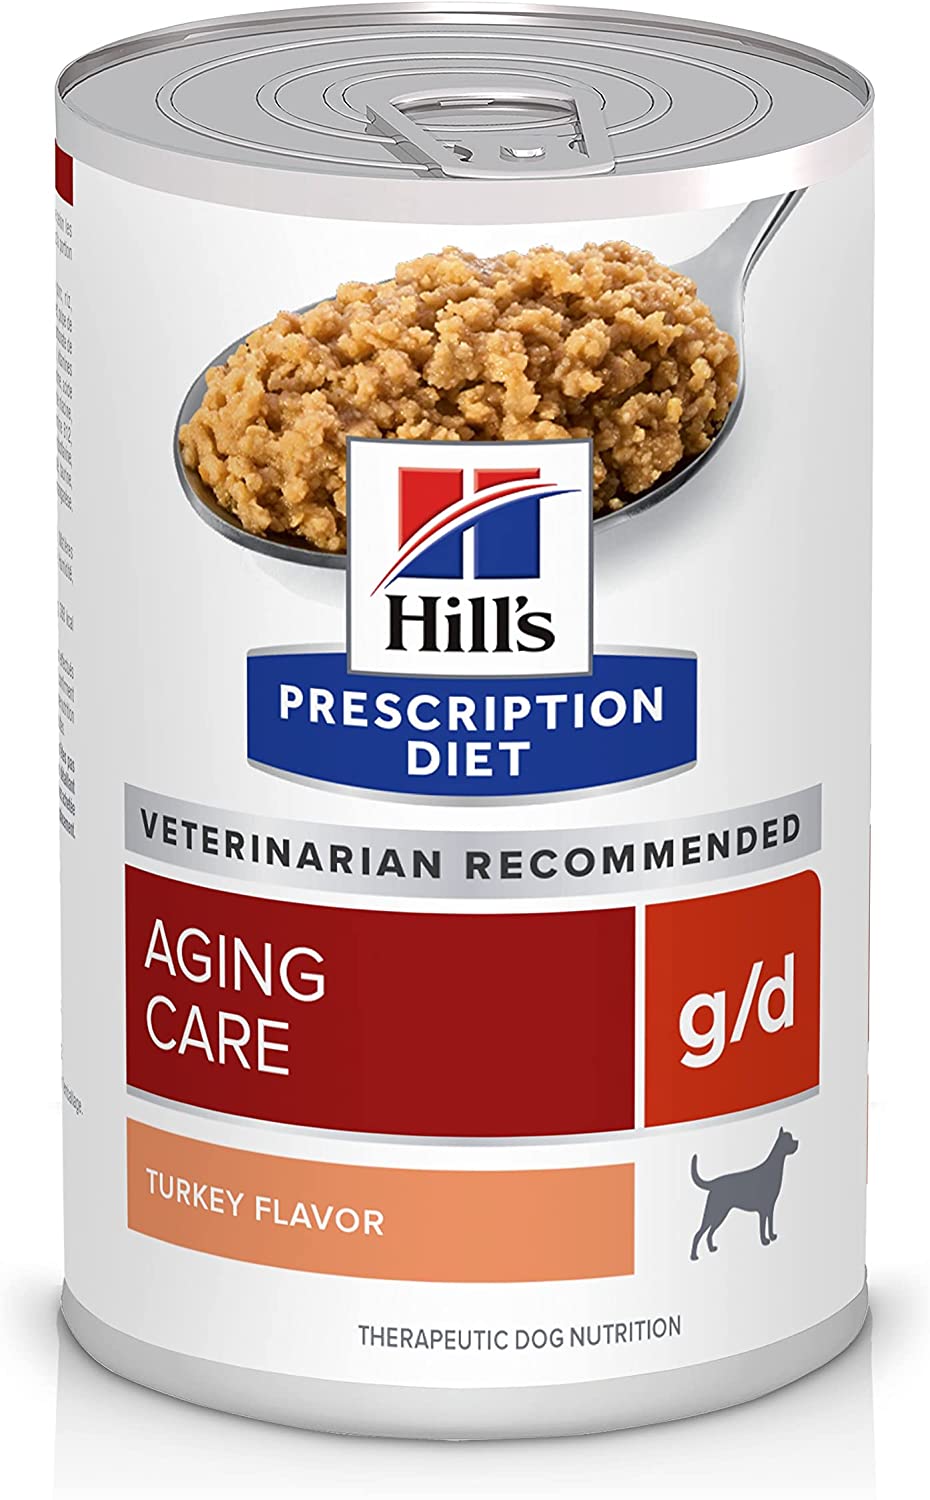 Hill_s Prescription Diet g d Aging Care Turkey Flavor Canned Dog Food-2